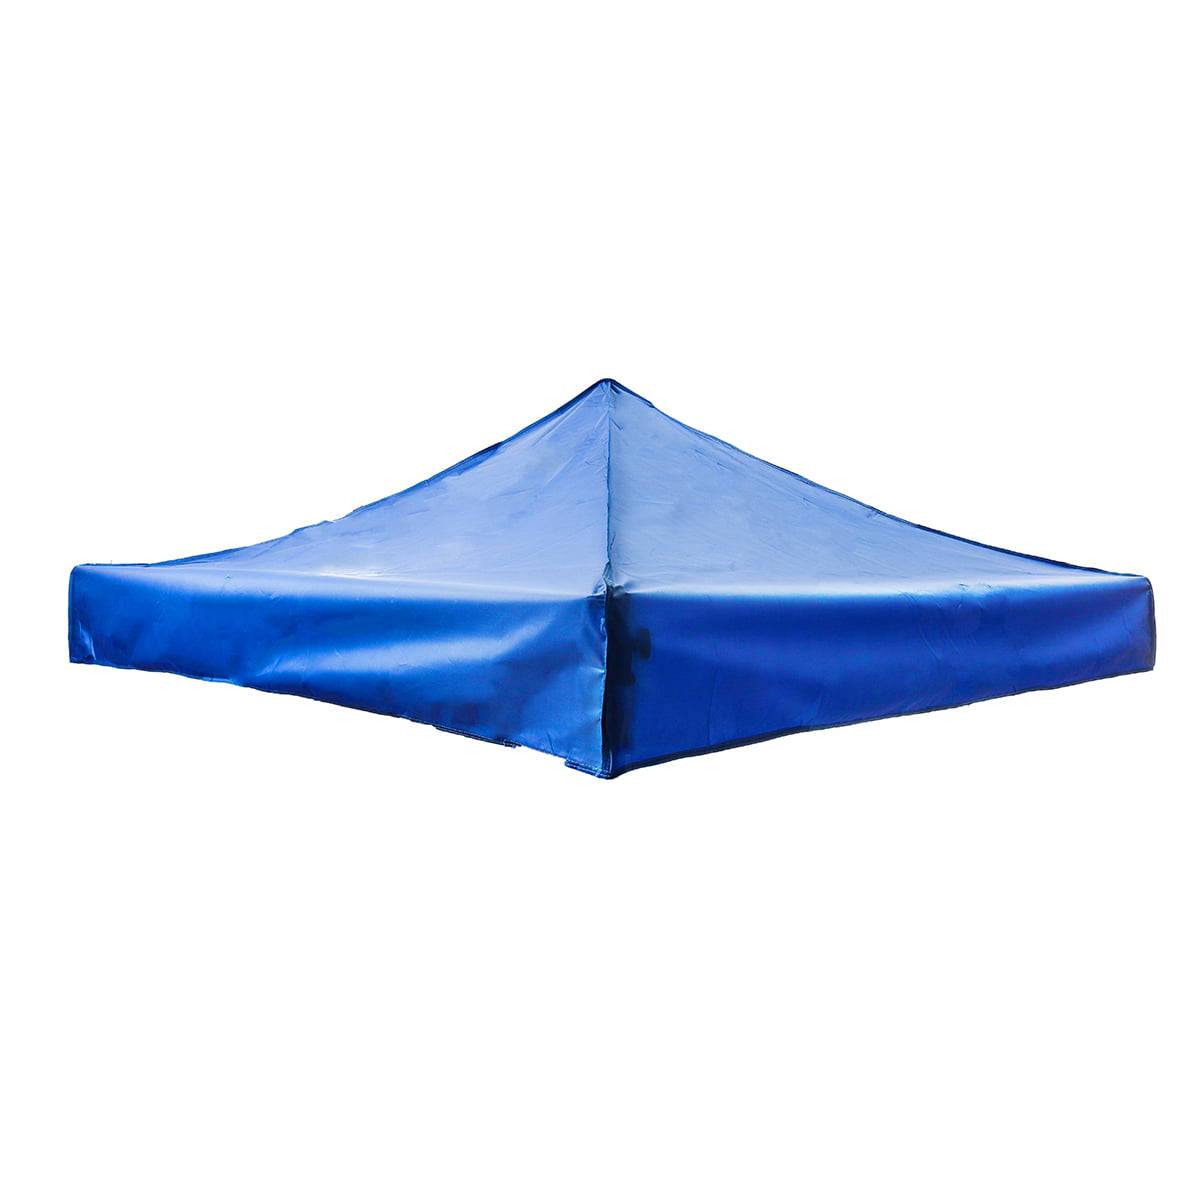 3x4.5m Garden Gazebo Top Cover Roof Replacement Tent Canopy 1-Tier Sunshade 